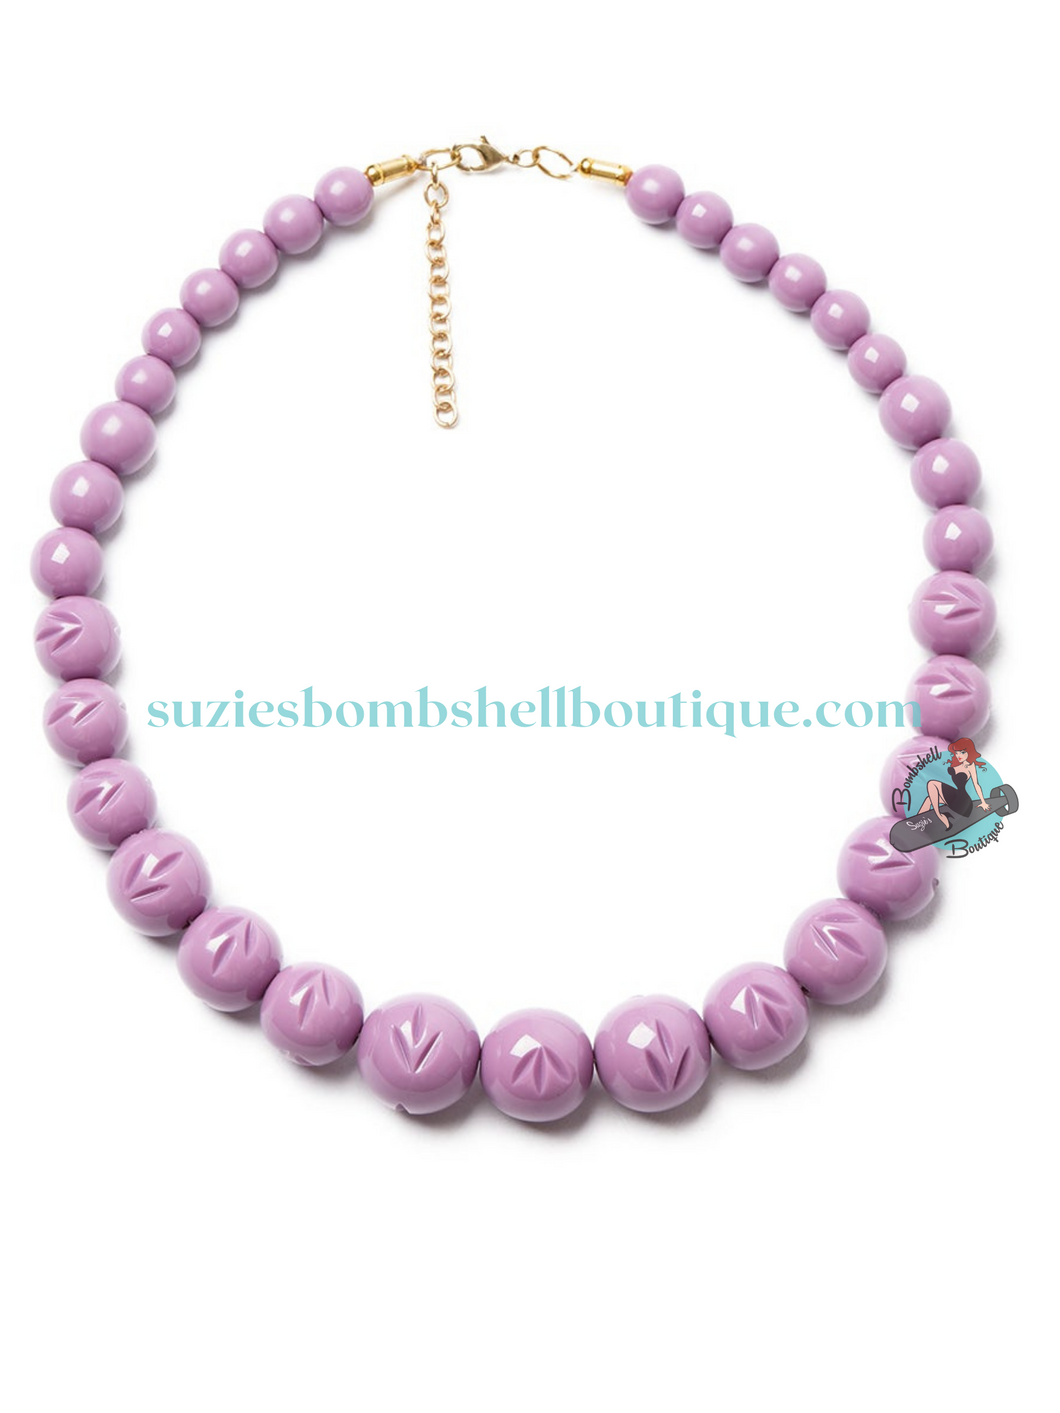 Splendette Canada Splendette Heather Heavy Carve Bead Necklace bakelite style carved necklace in lilac purple pastel retro vintage 40s 50s pinup jewellery costume jewelry Canadian Pin-Up Shop Suzie's Bombshell Boutique